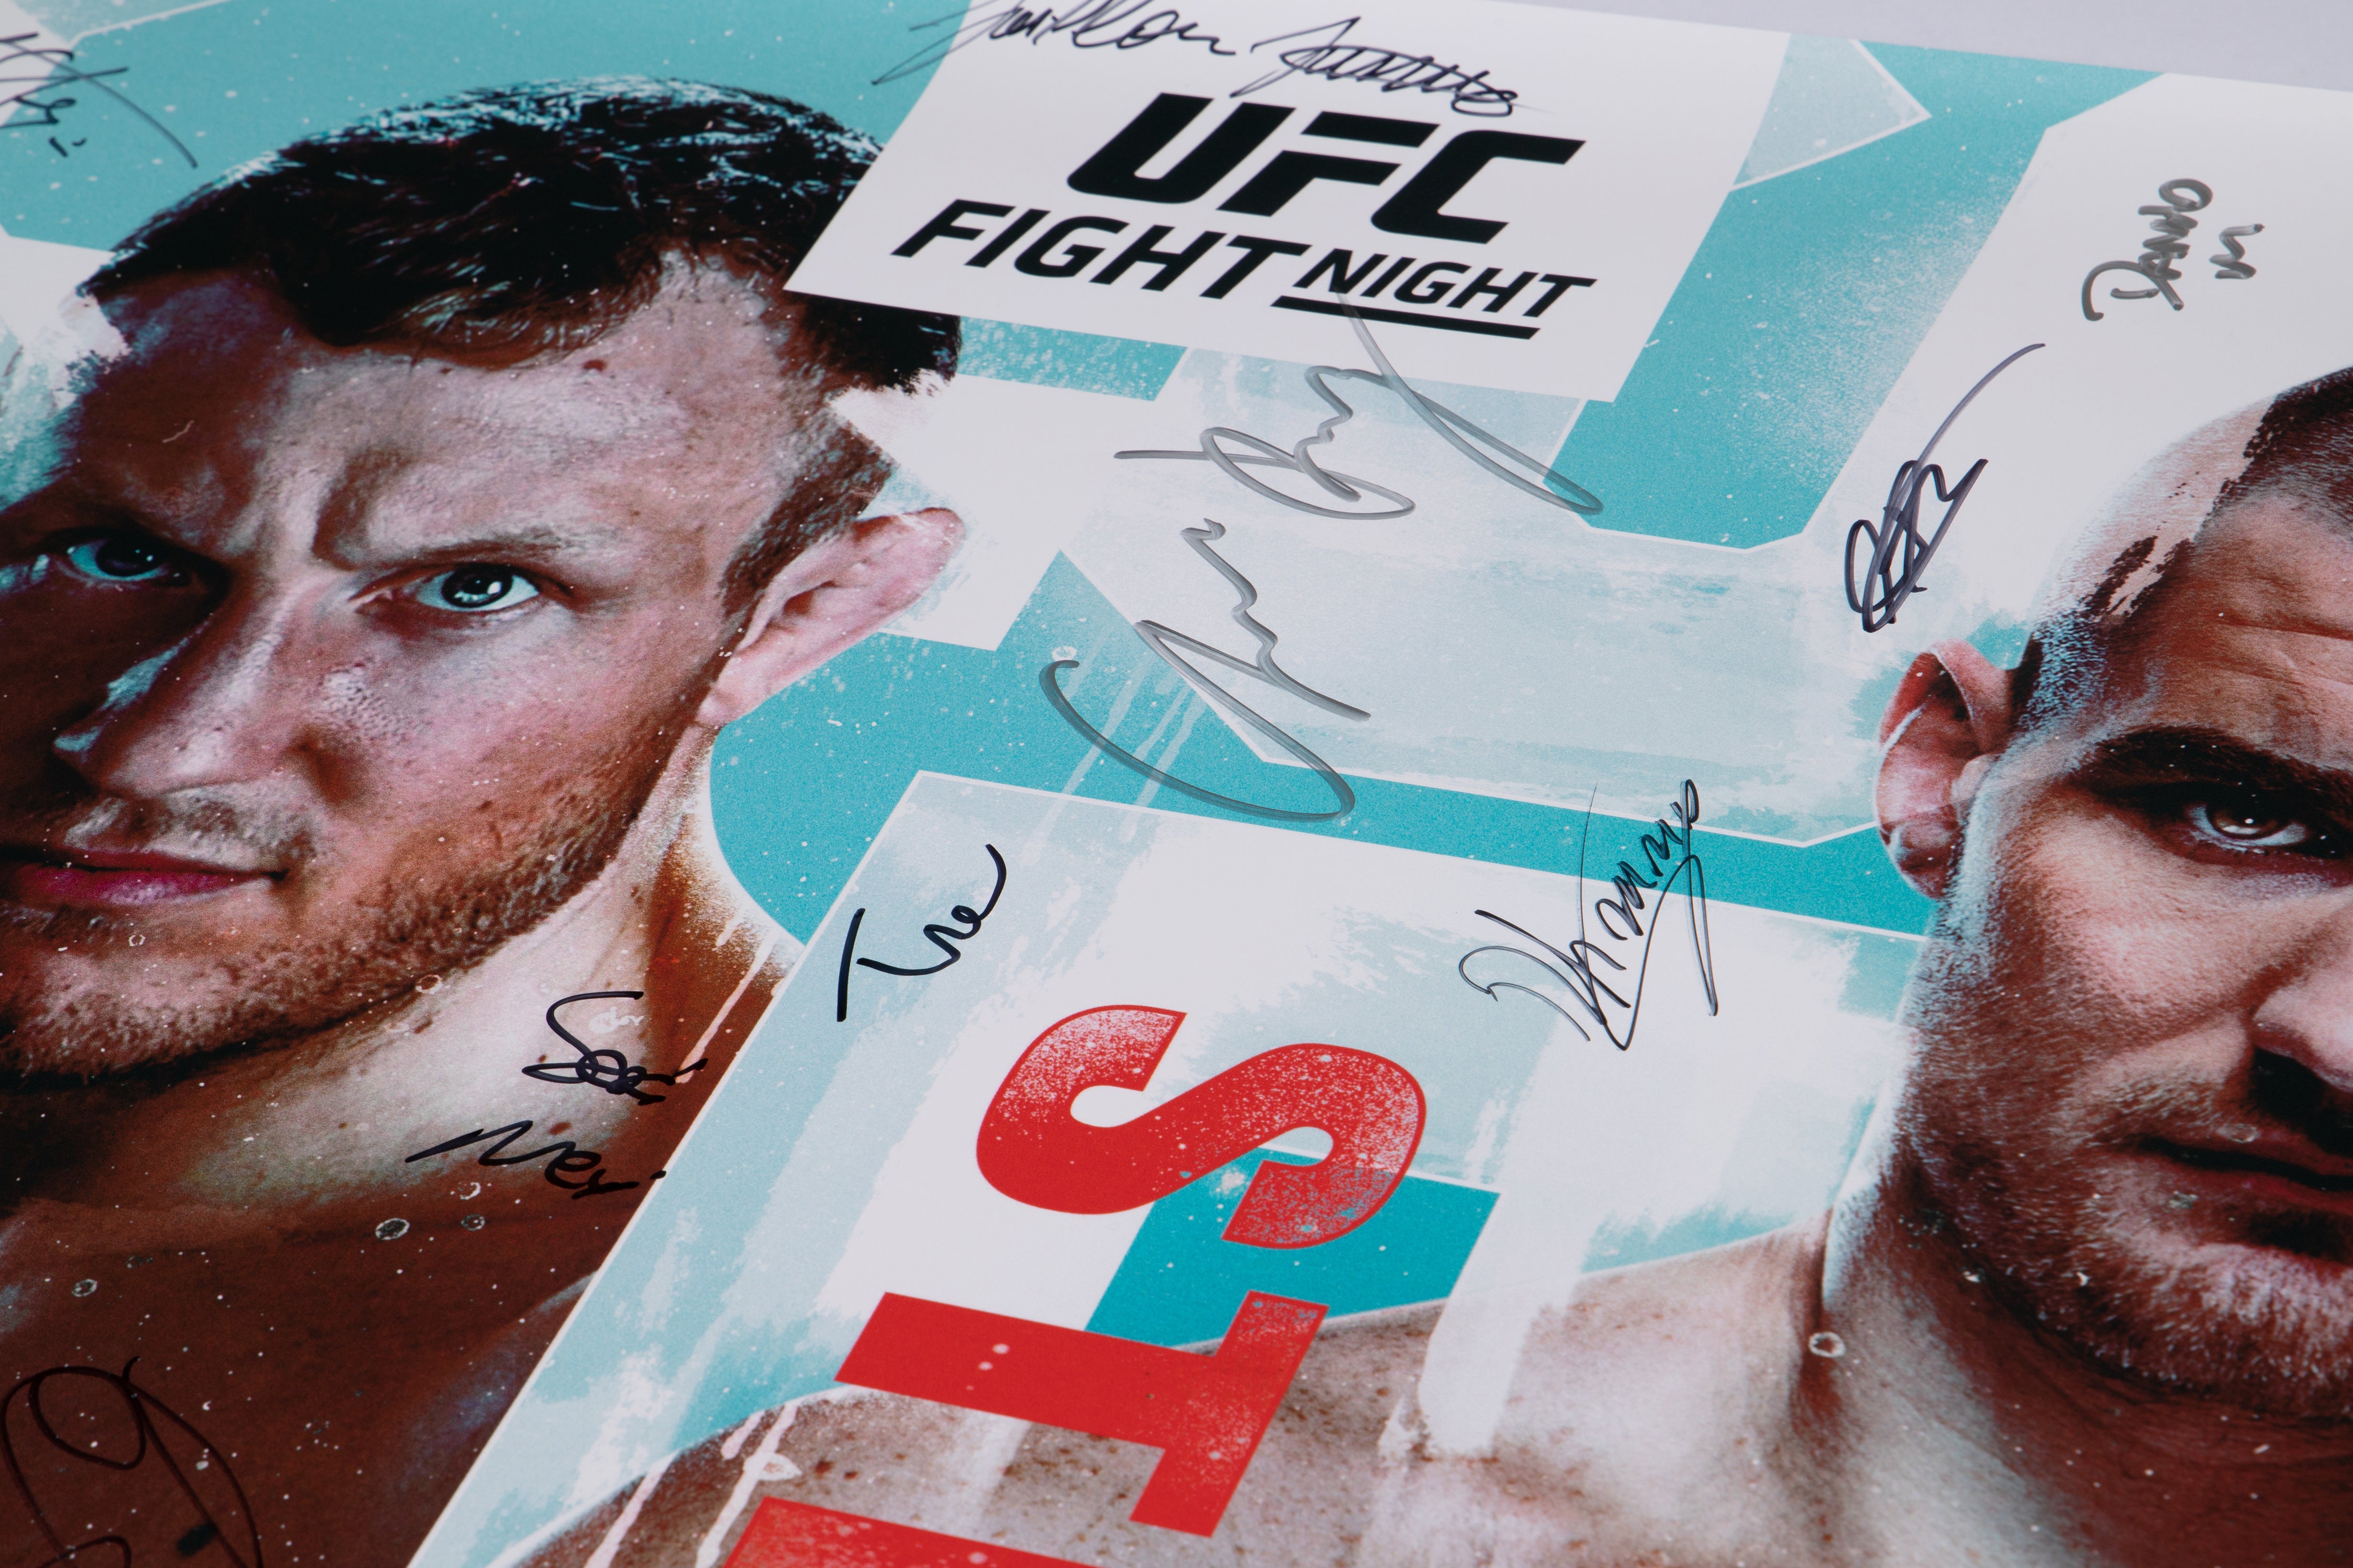 UFC Fight Night: Hermansson vs Strickland Autographed Event Poster